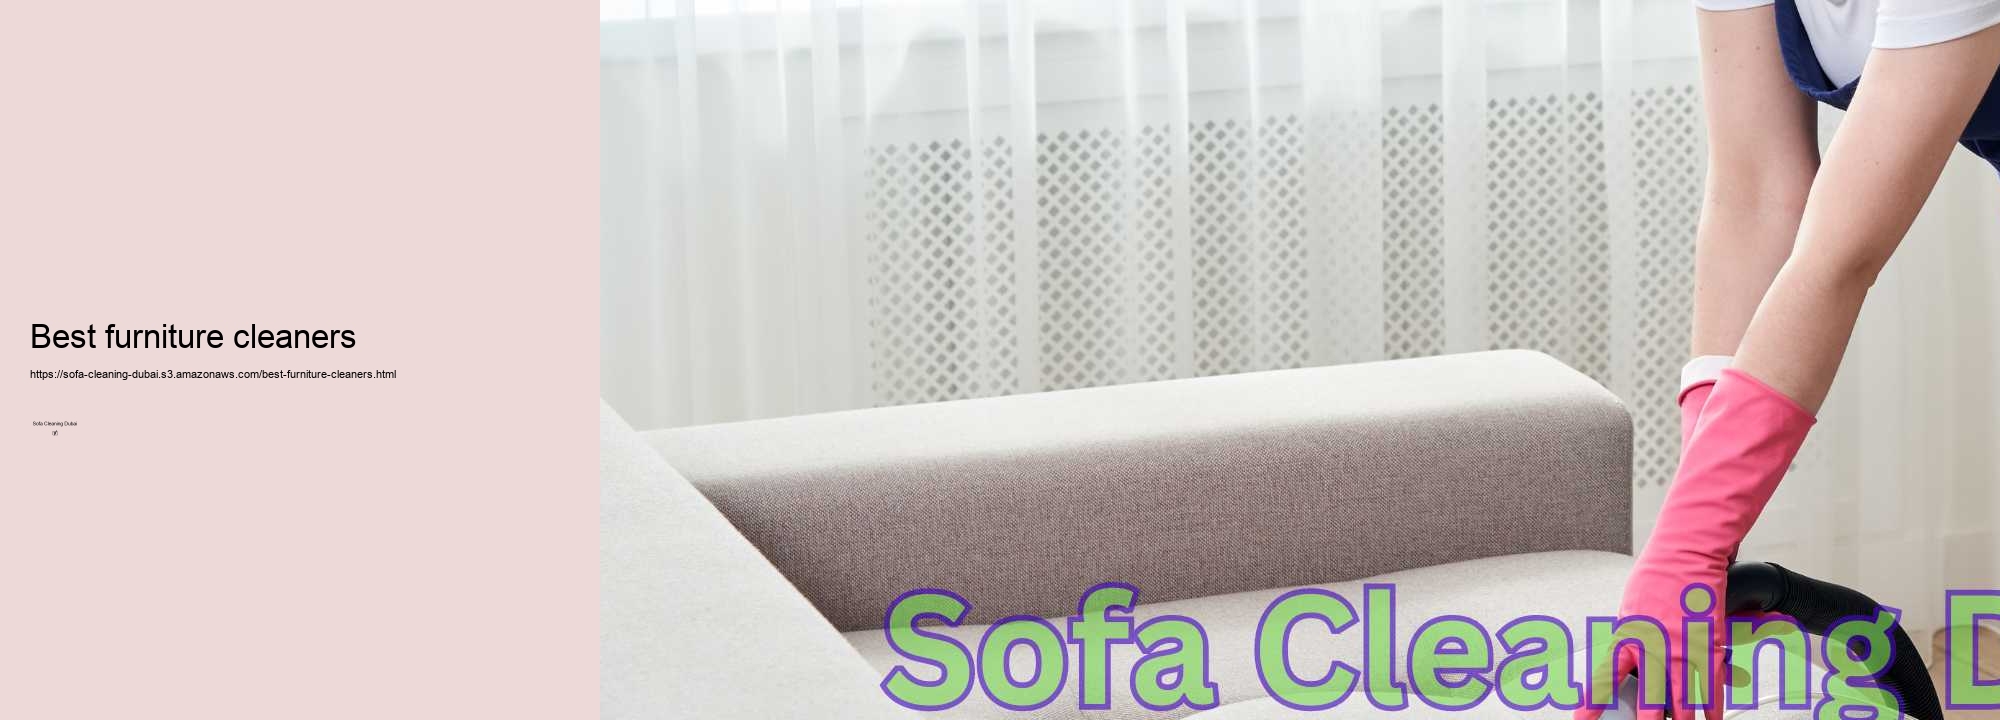 Best furniture cleaners